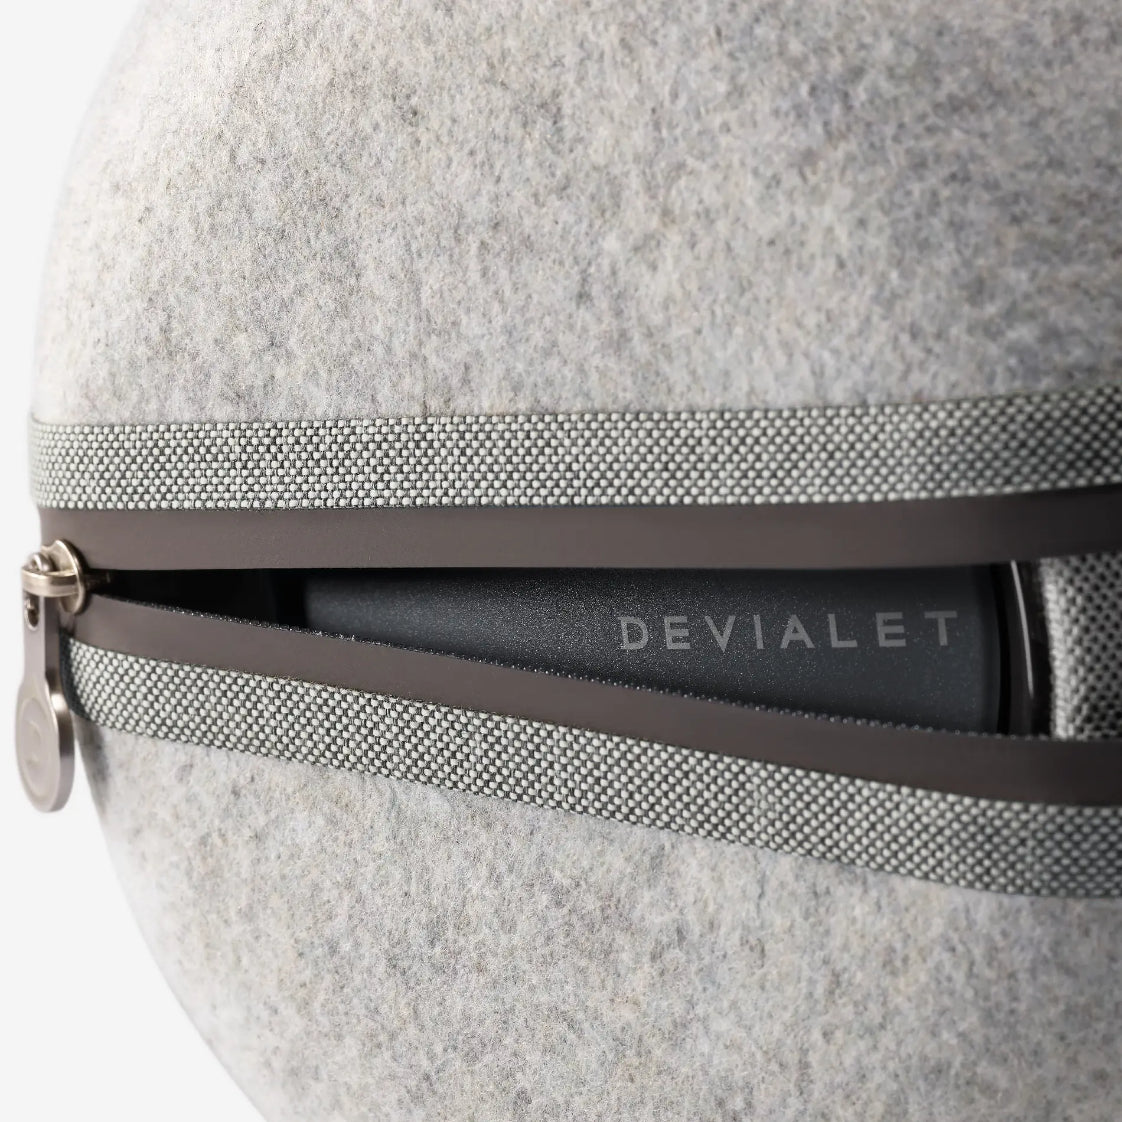 Devialet Cocoon Carry Case for Mania Speaker